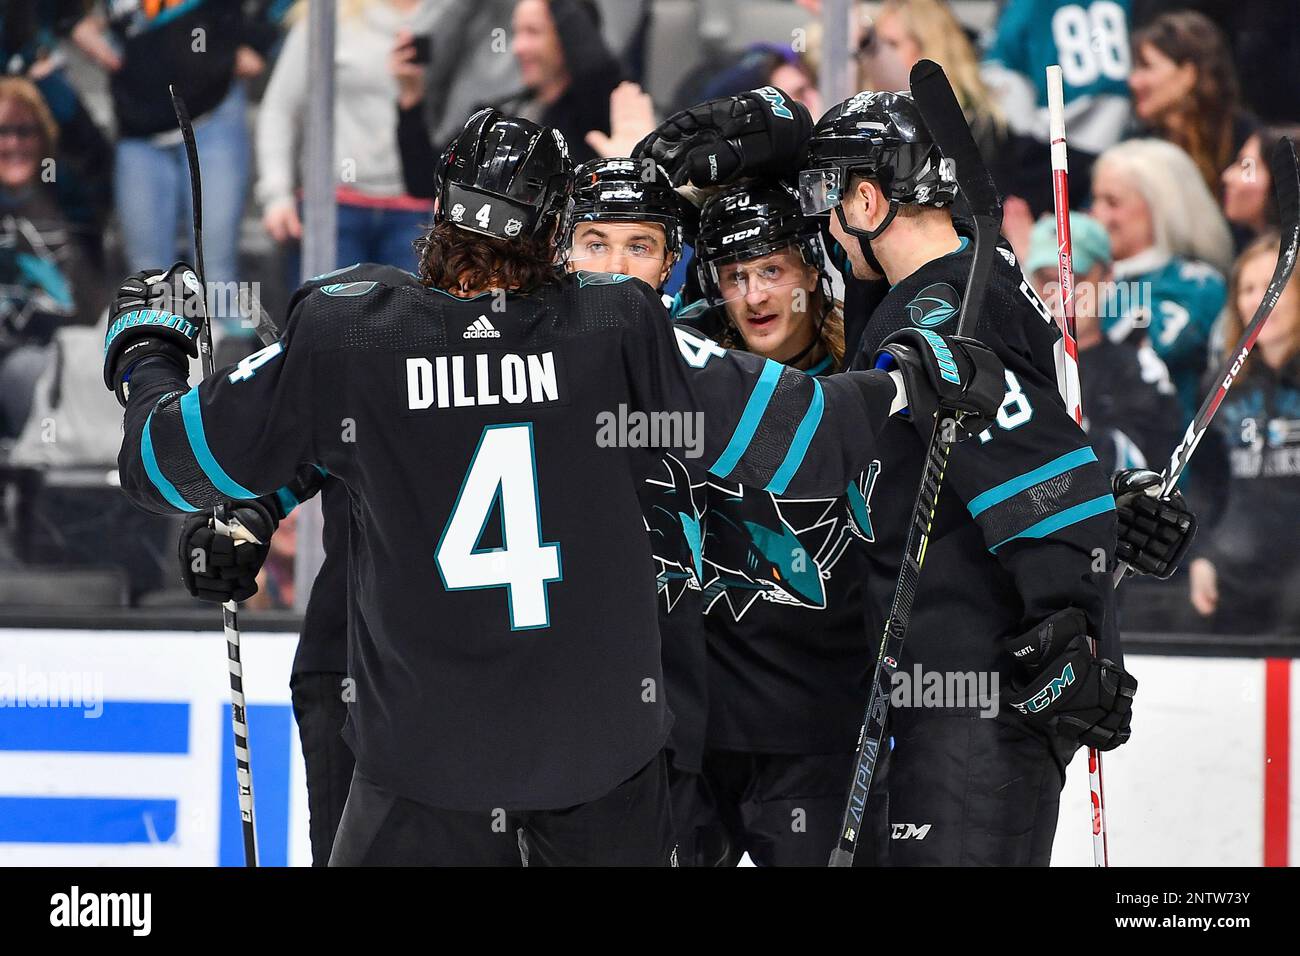 San Jose Sharks defenseman Brenden Dillon (4)during the NHL hockey game  against the Calgary Flames, Monday, Feb. 10, 2020, in San Jose, California,  USA. The Flames defeated the Sharks 6-2. (Photo by